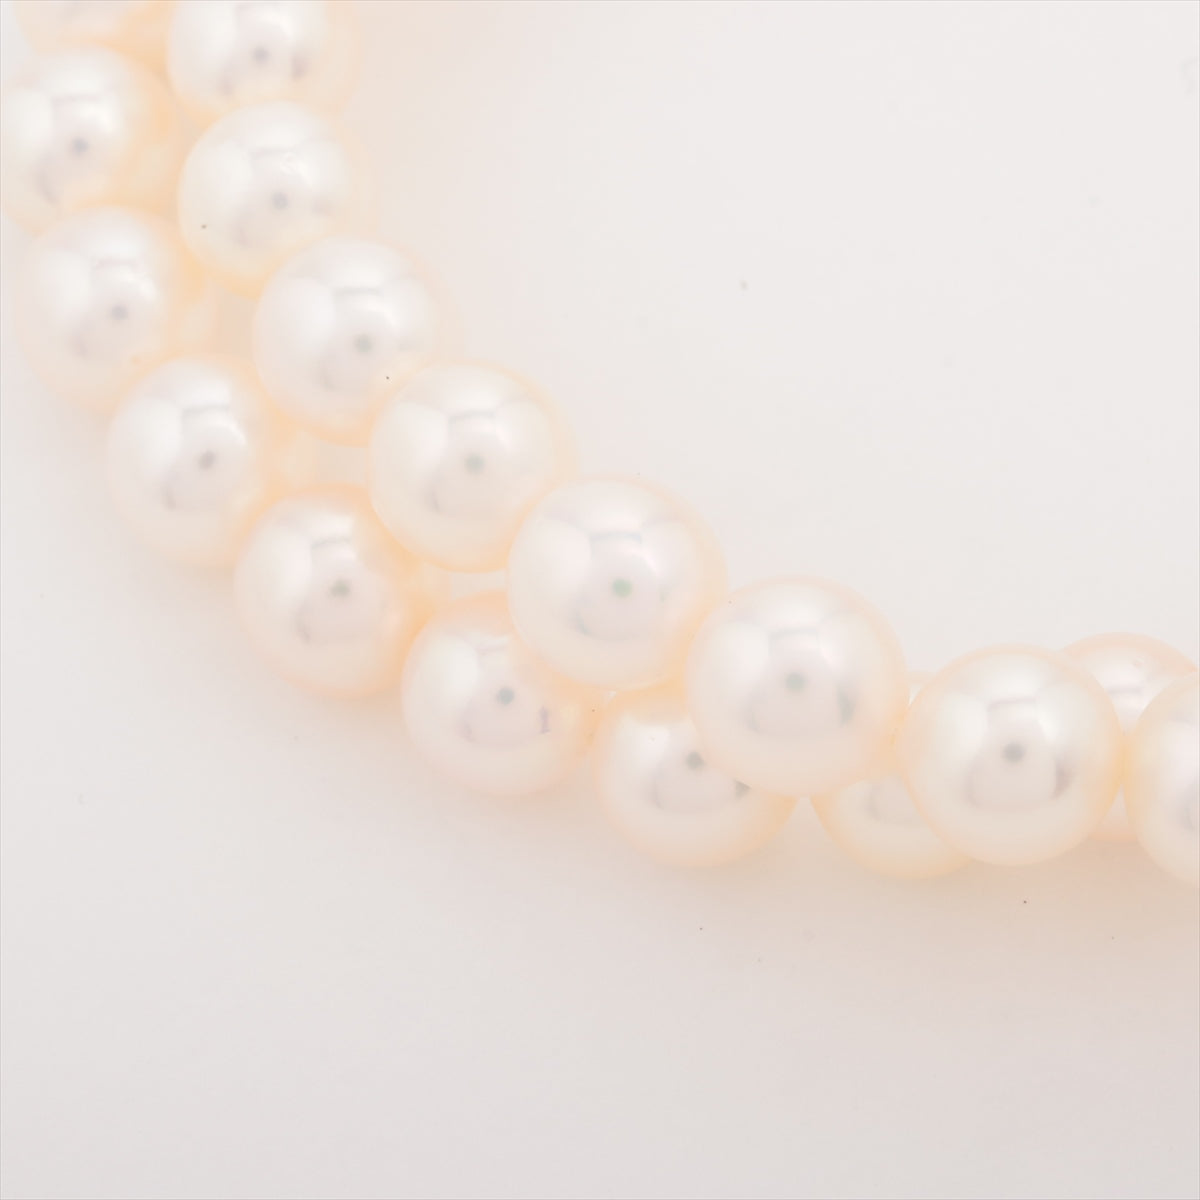 TASAKI Pearl Necklace SV Total 37.9g Approx. 7.5mm-8.0mm Pearl degradation